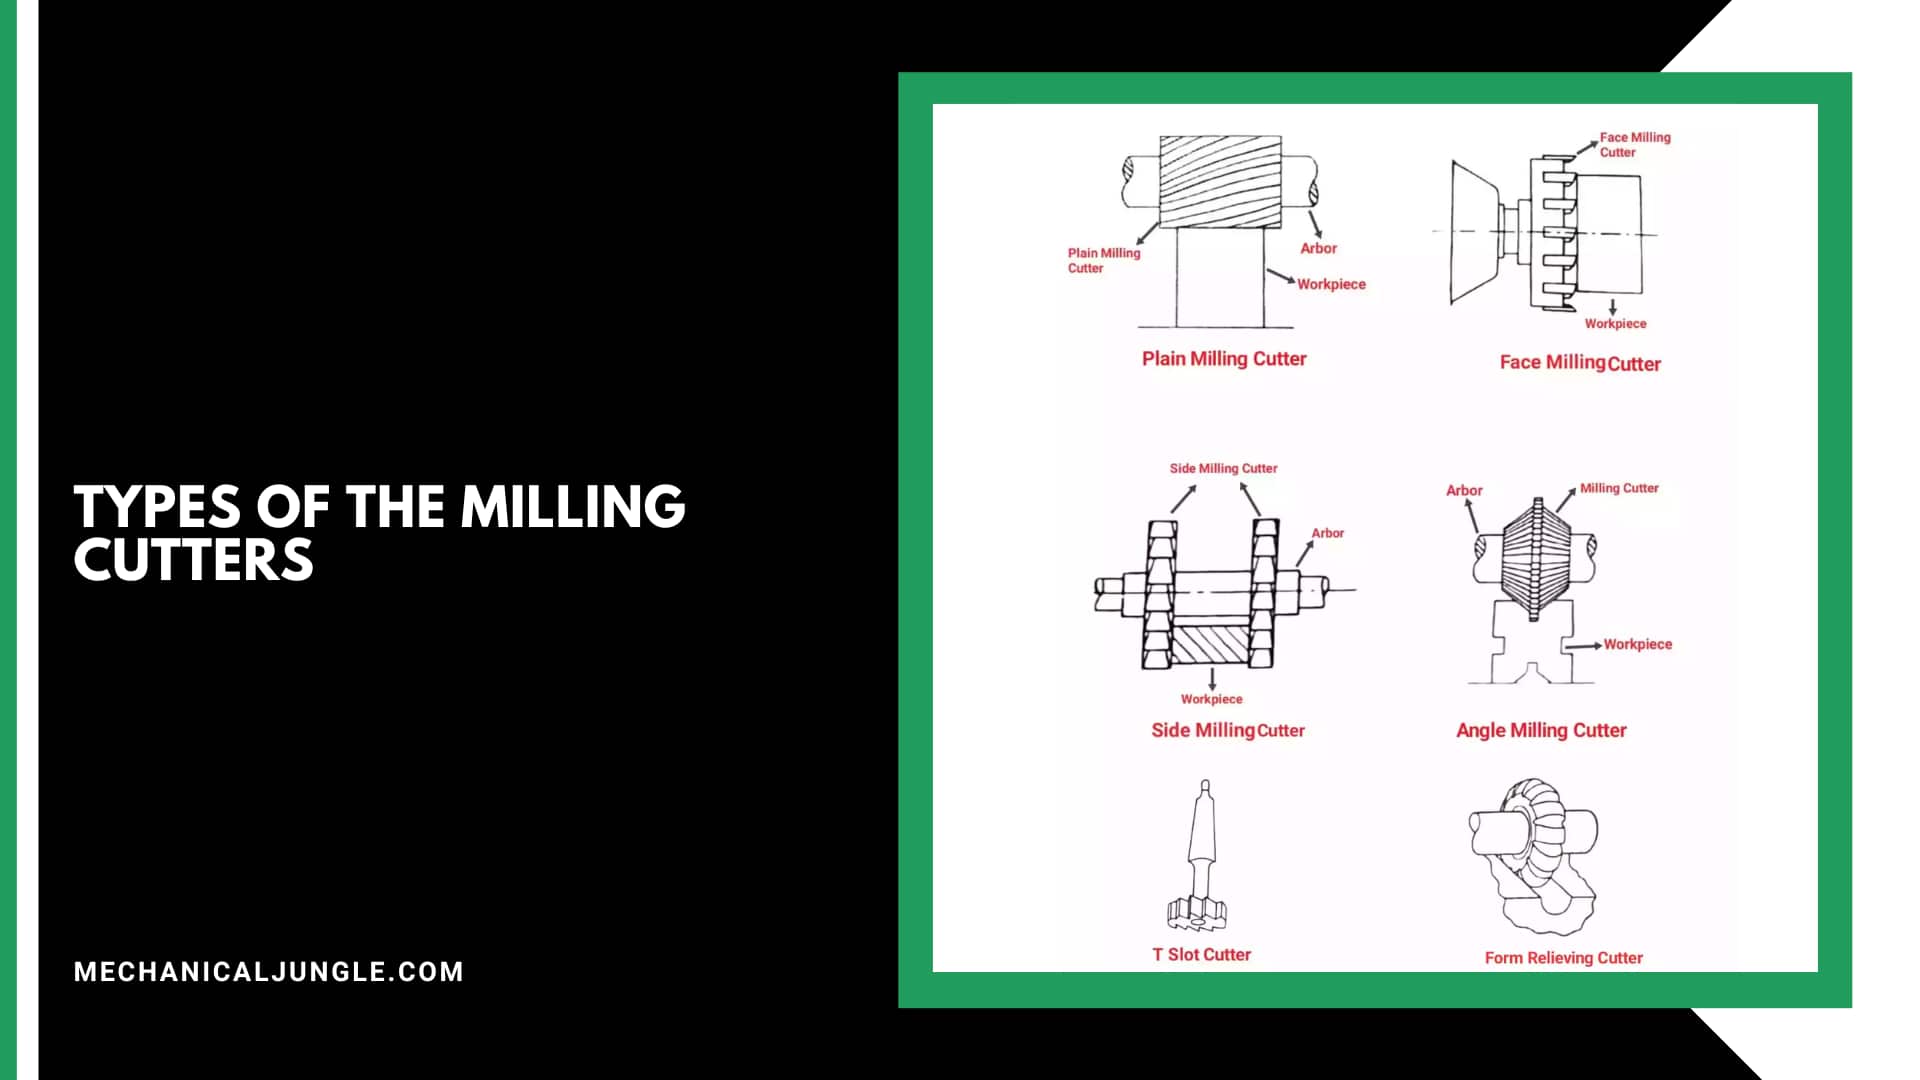 Types of the Milling Cutters